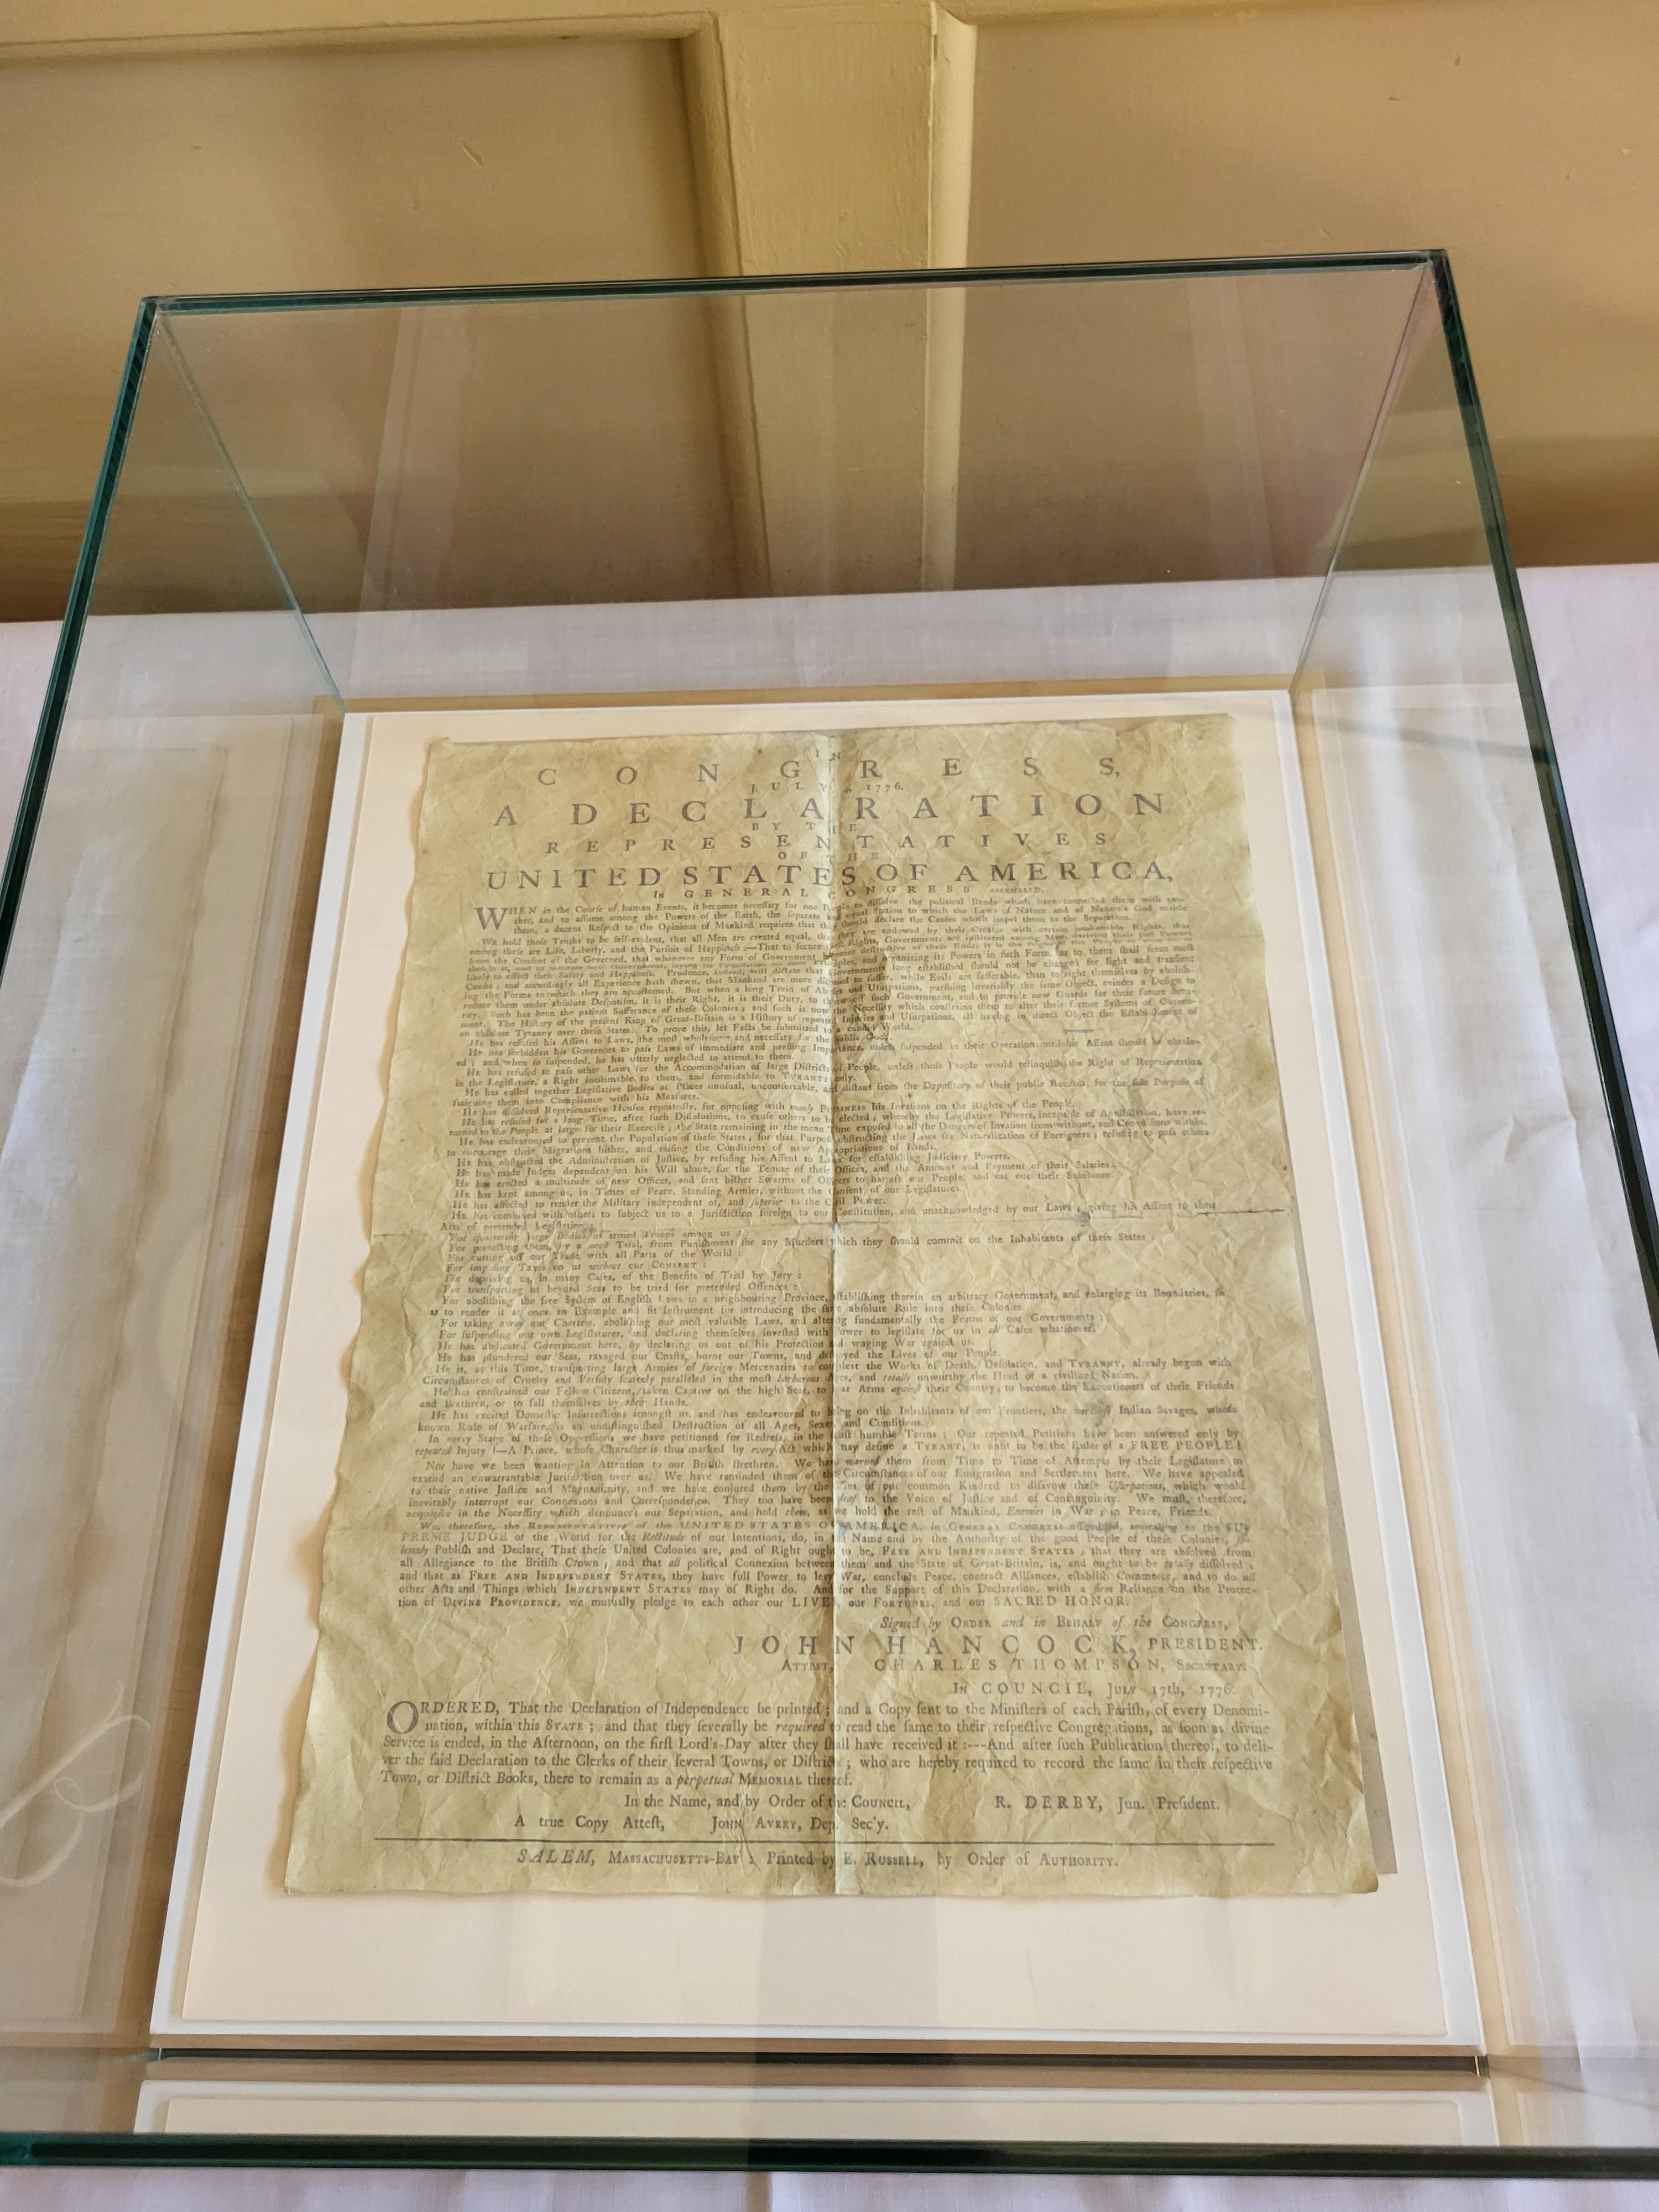 Historical document, presumed to be the Declaration of Independence, displayed under glass